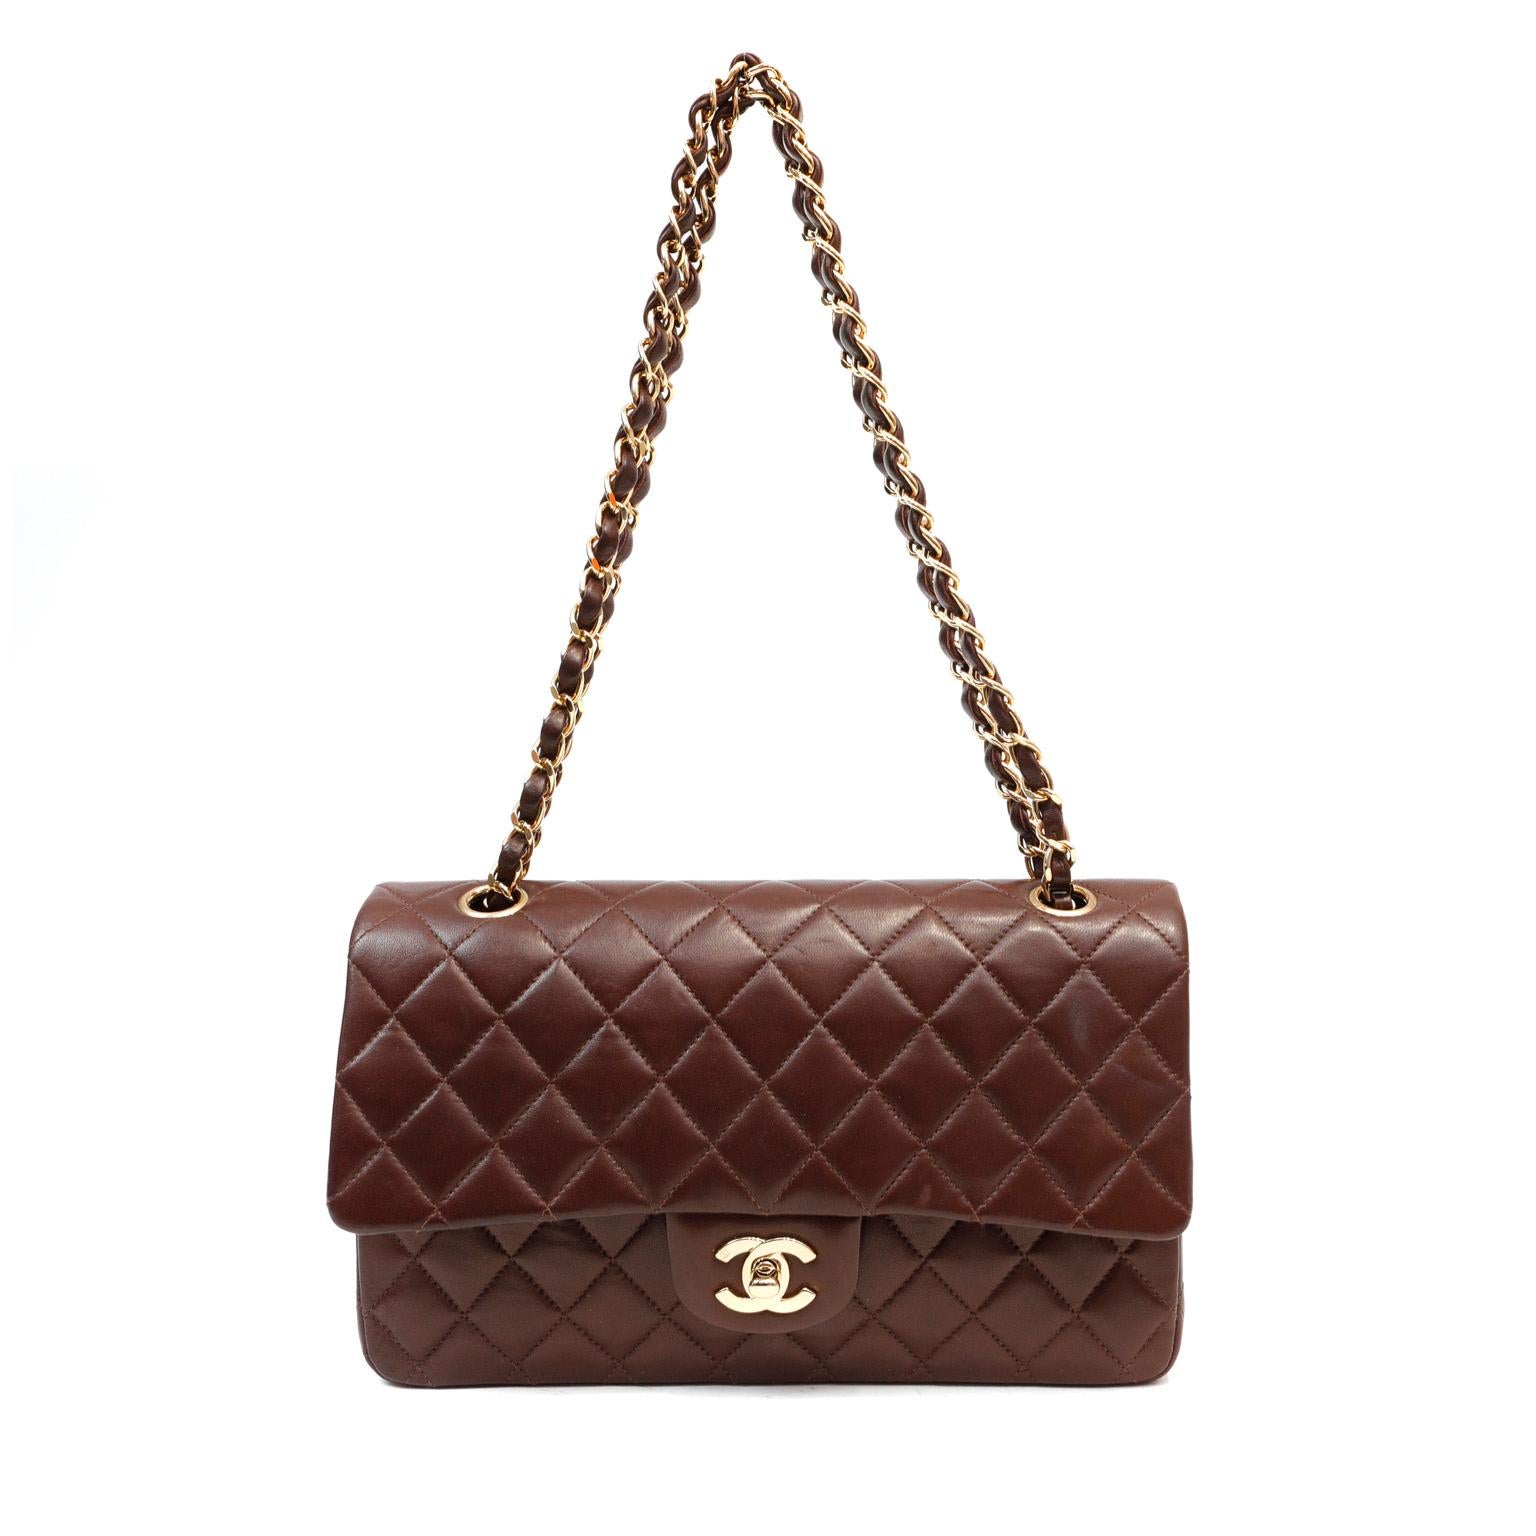 This authentic Chanel Brown Lambskin Medium Classic Double Flap Bag is in pristine condition.  Most commonly seen in black, this rare chocolate brown version is exquisite and perfectly scaled in the medium silhouette.

Rich chocolate brown lambskin